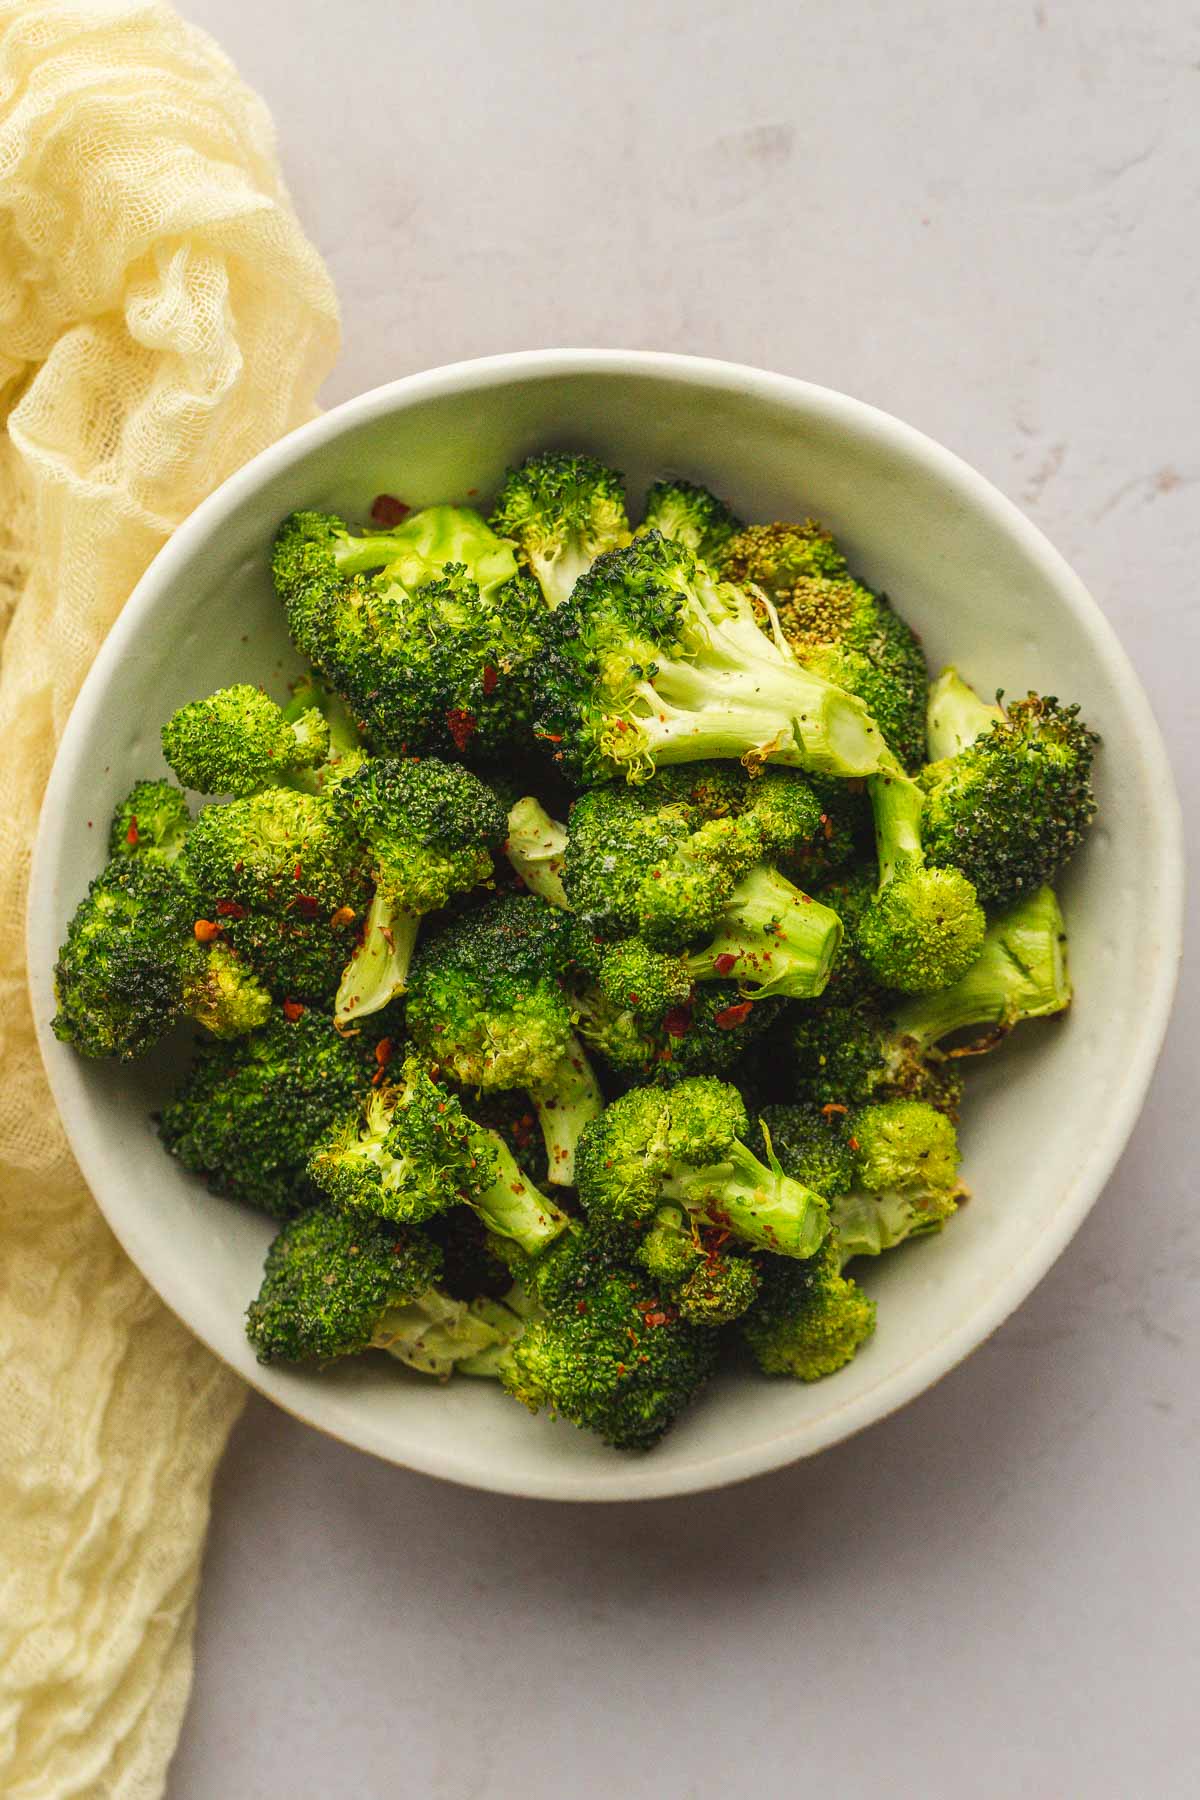 Roasted broccoli in a bowl